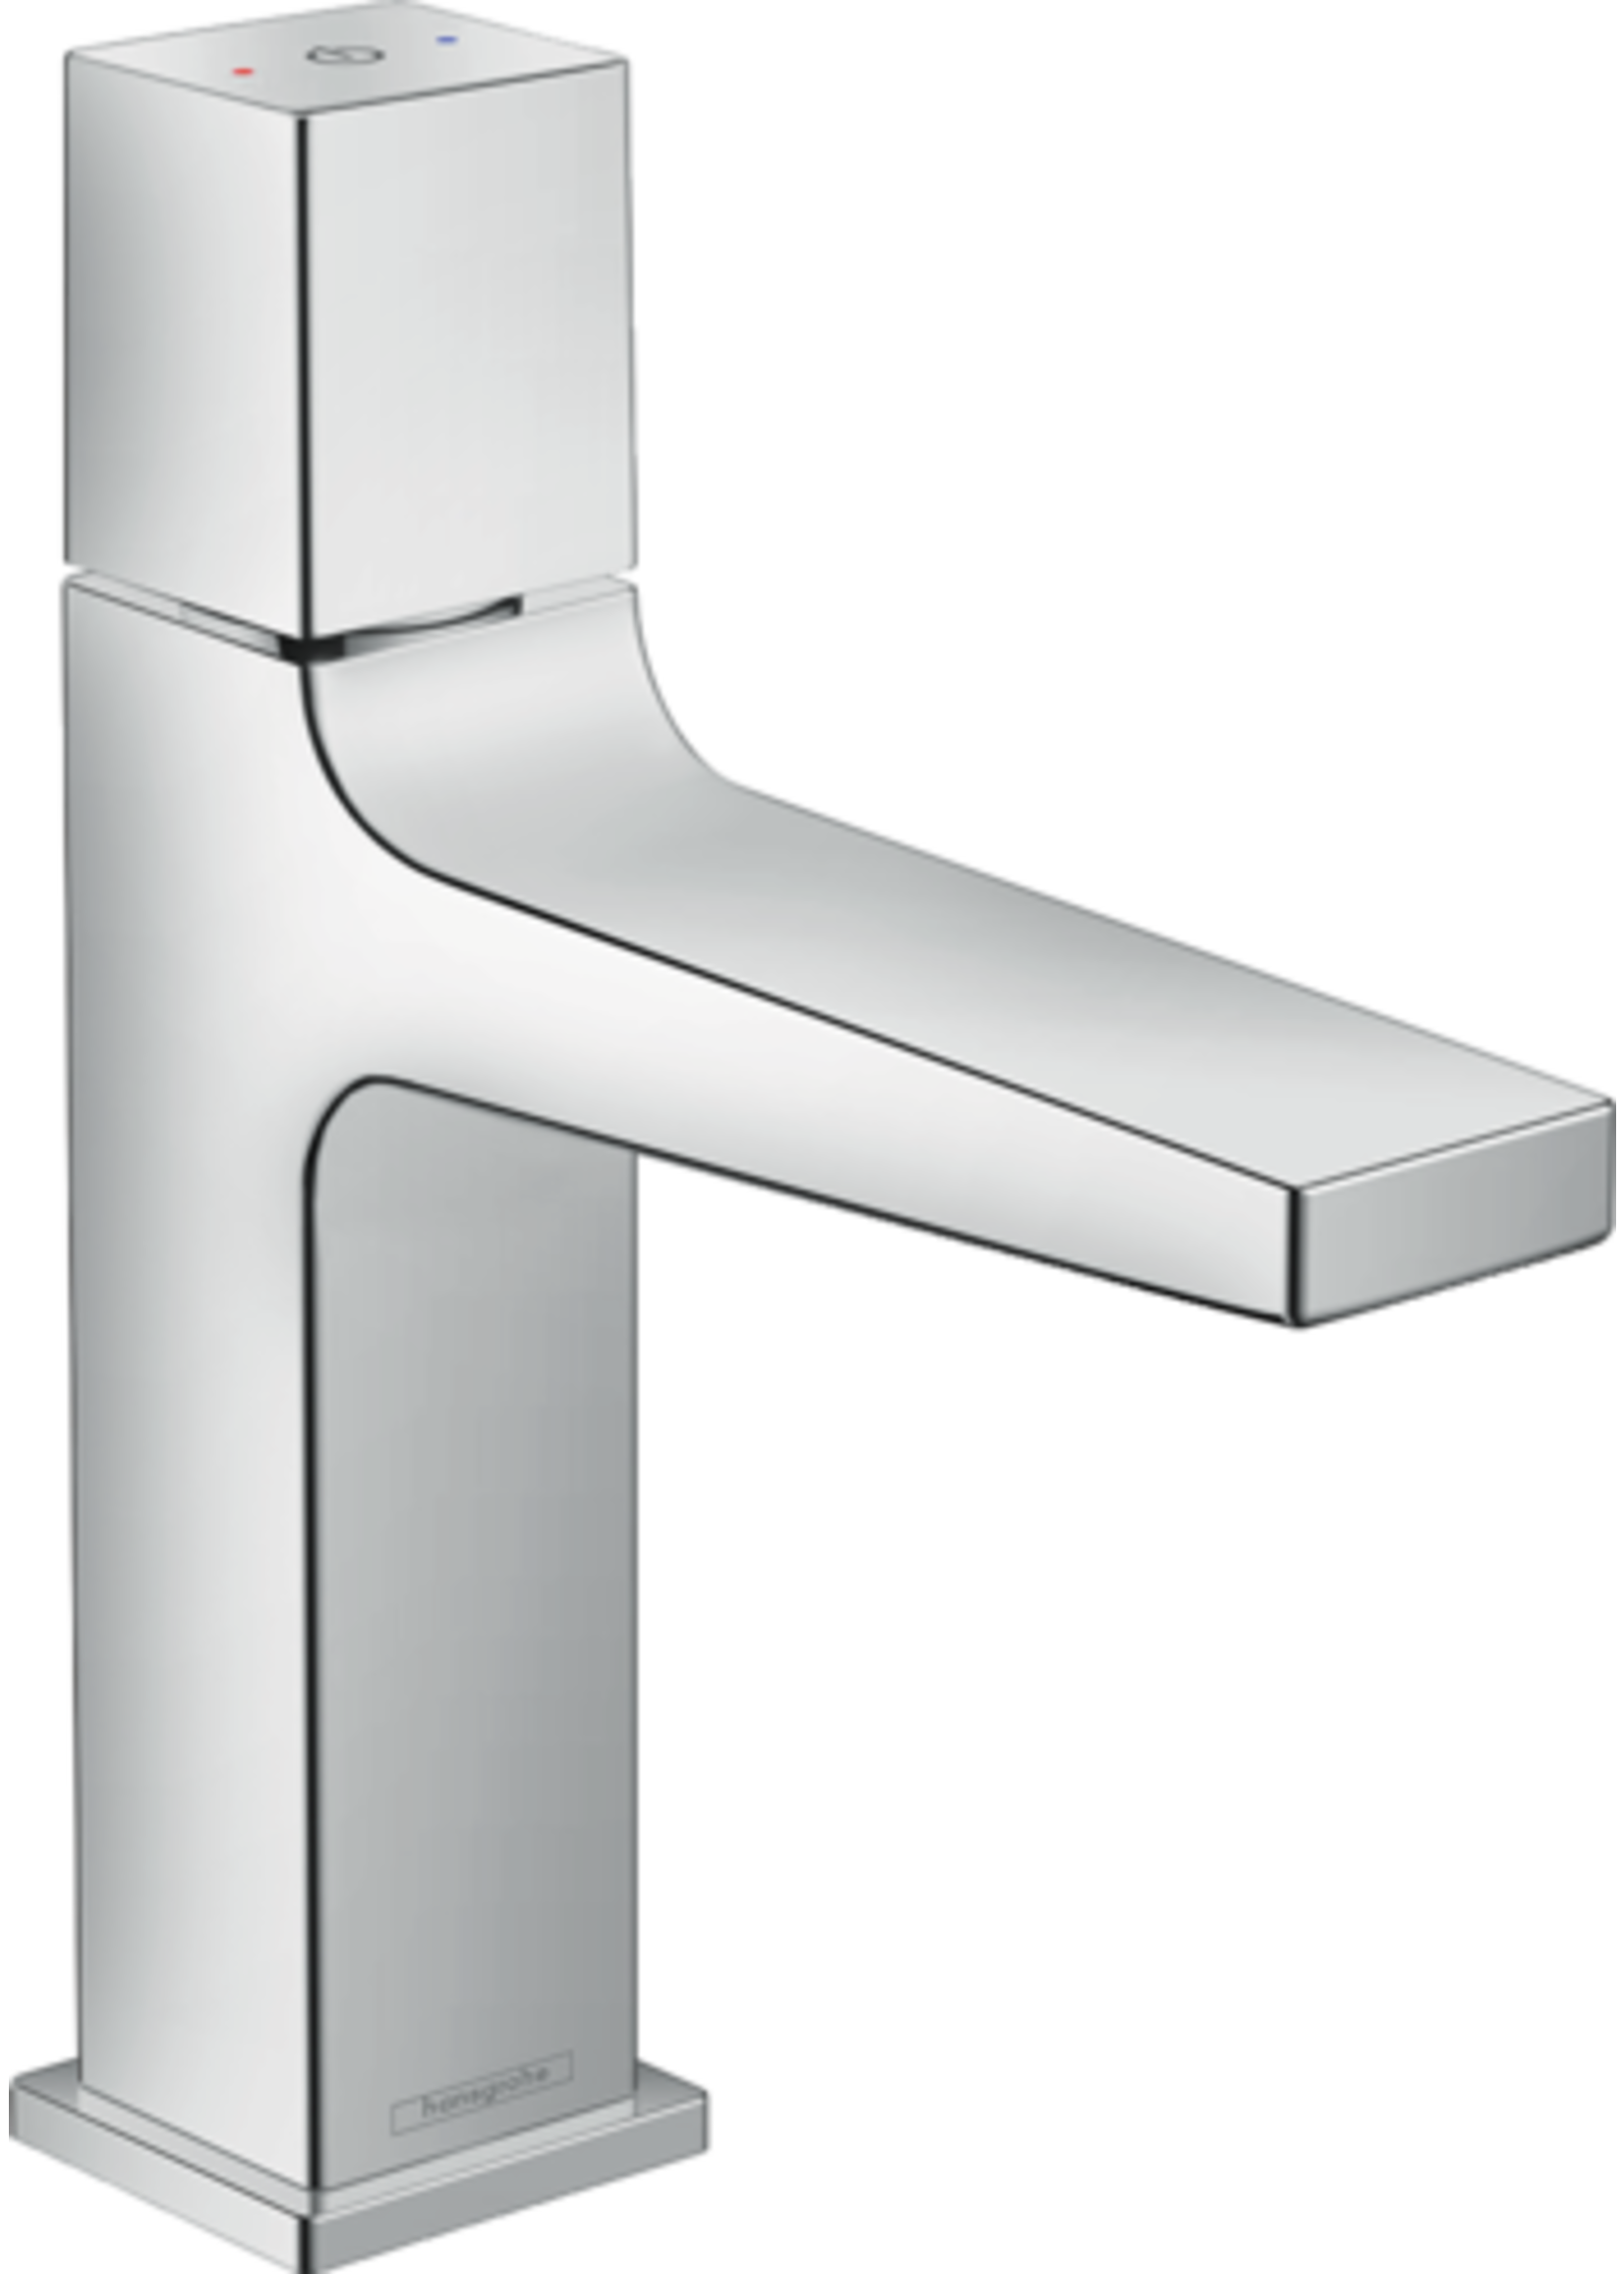 Hansgrohe Hansgrohe Metropol Single-Hole Faucet 110 Select, 1.2 GPM - Chrome